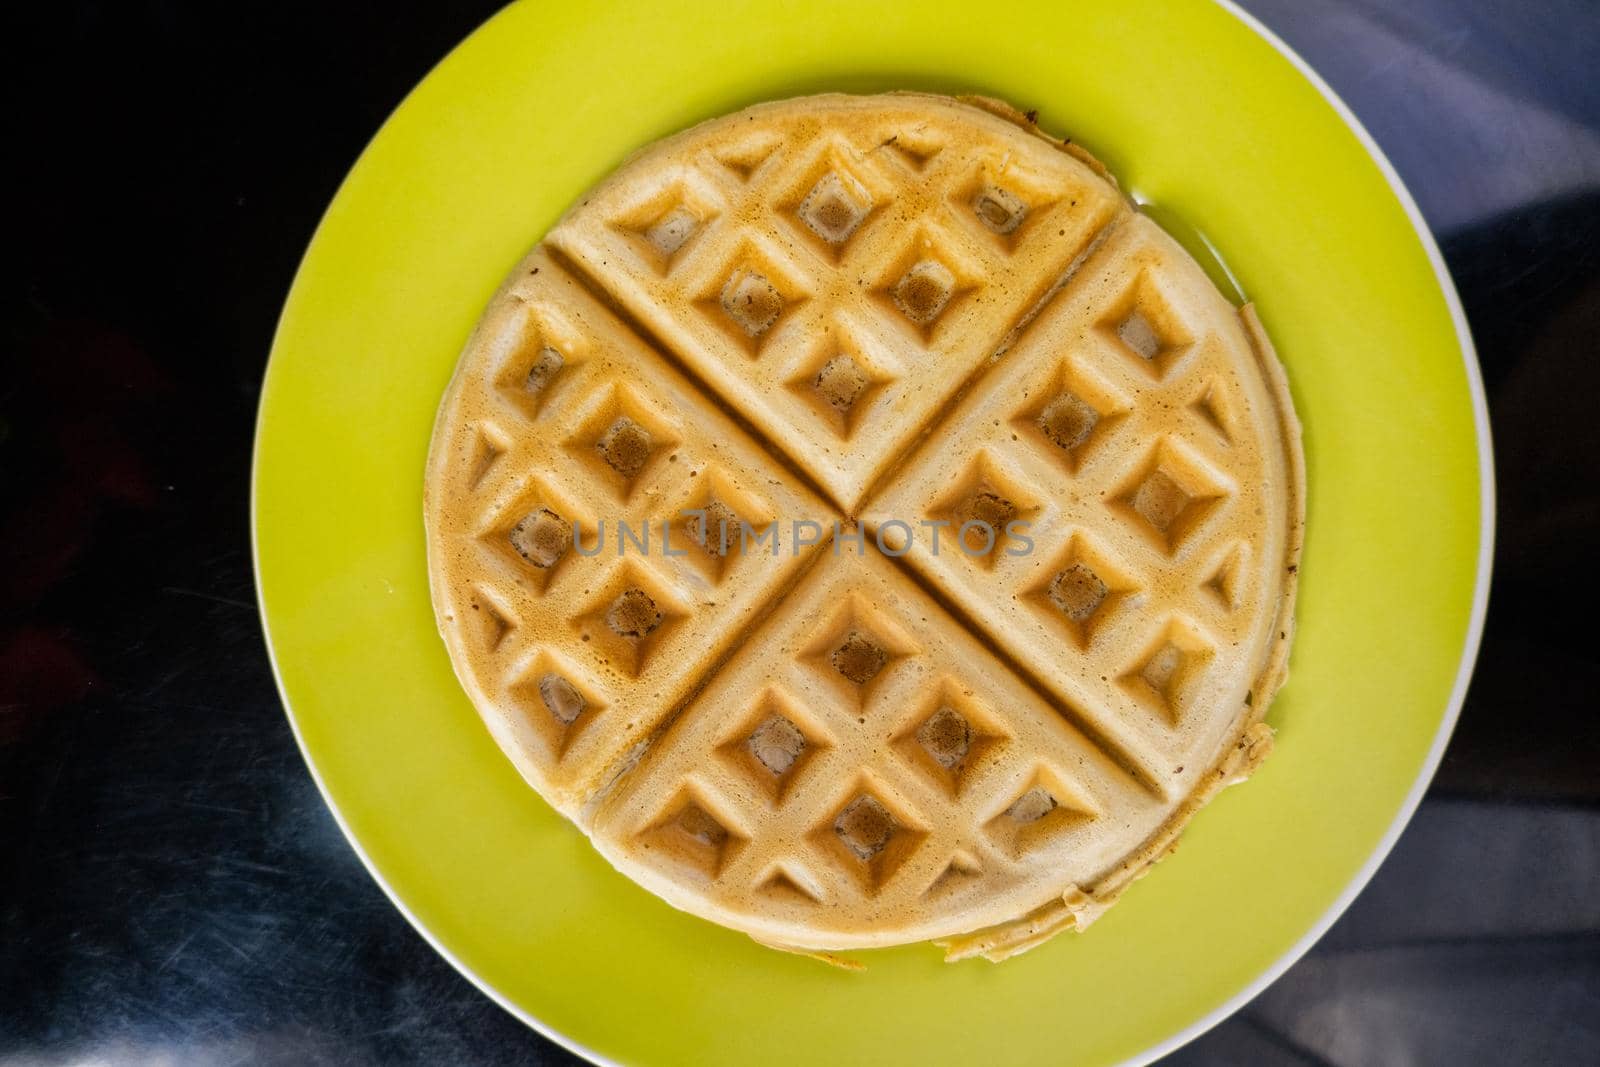 Fresh round waffle on yellow plate from above. Top view of tasty-looking waffle without toppings above black table. Sweet healthy breakfast